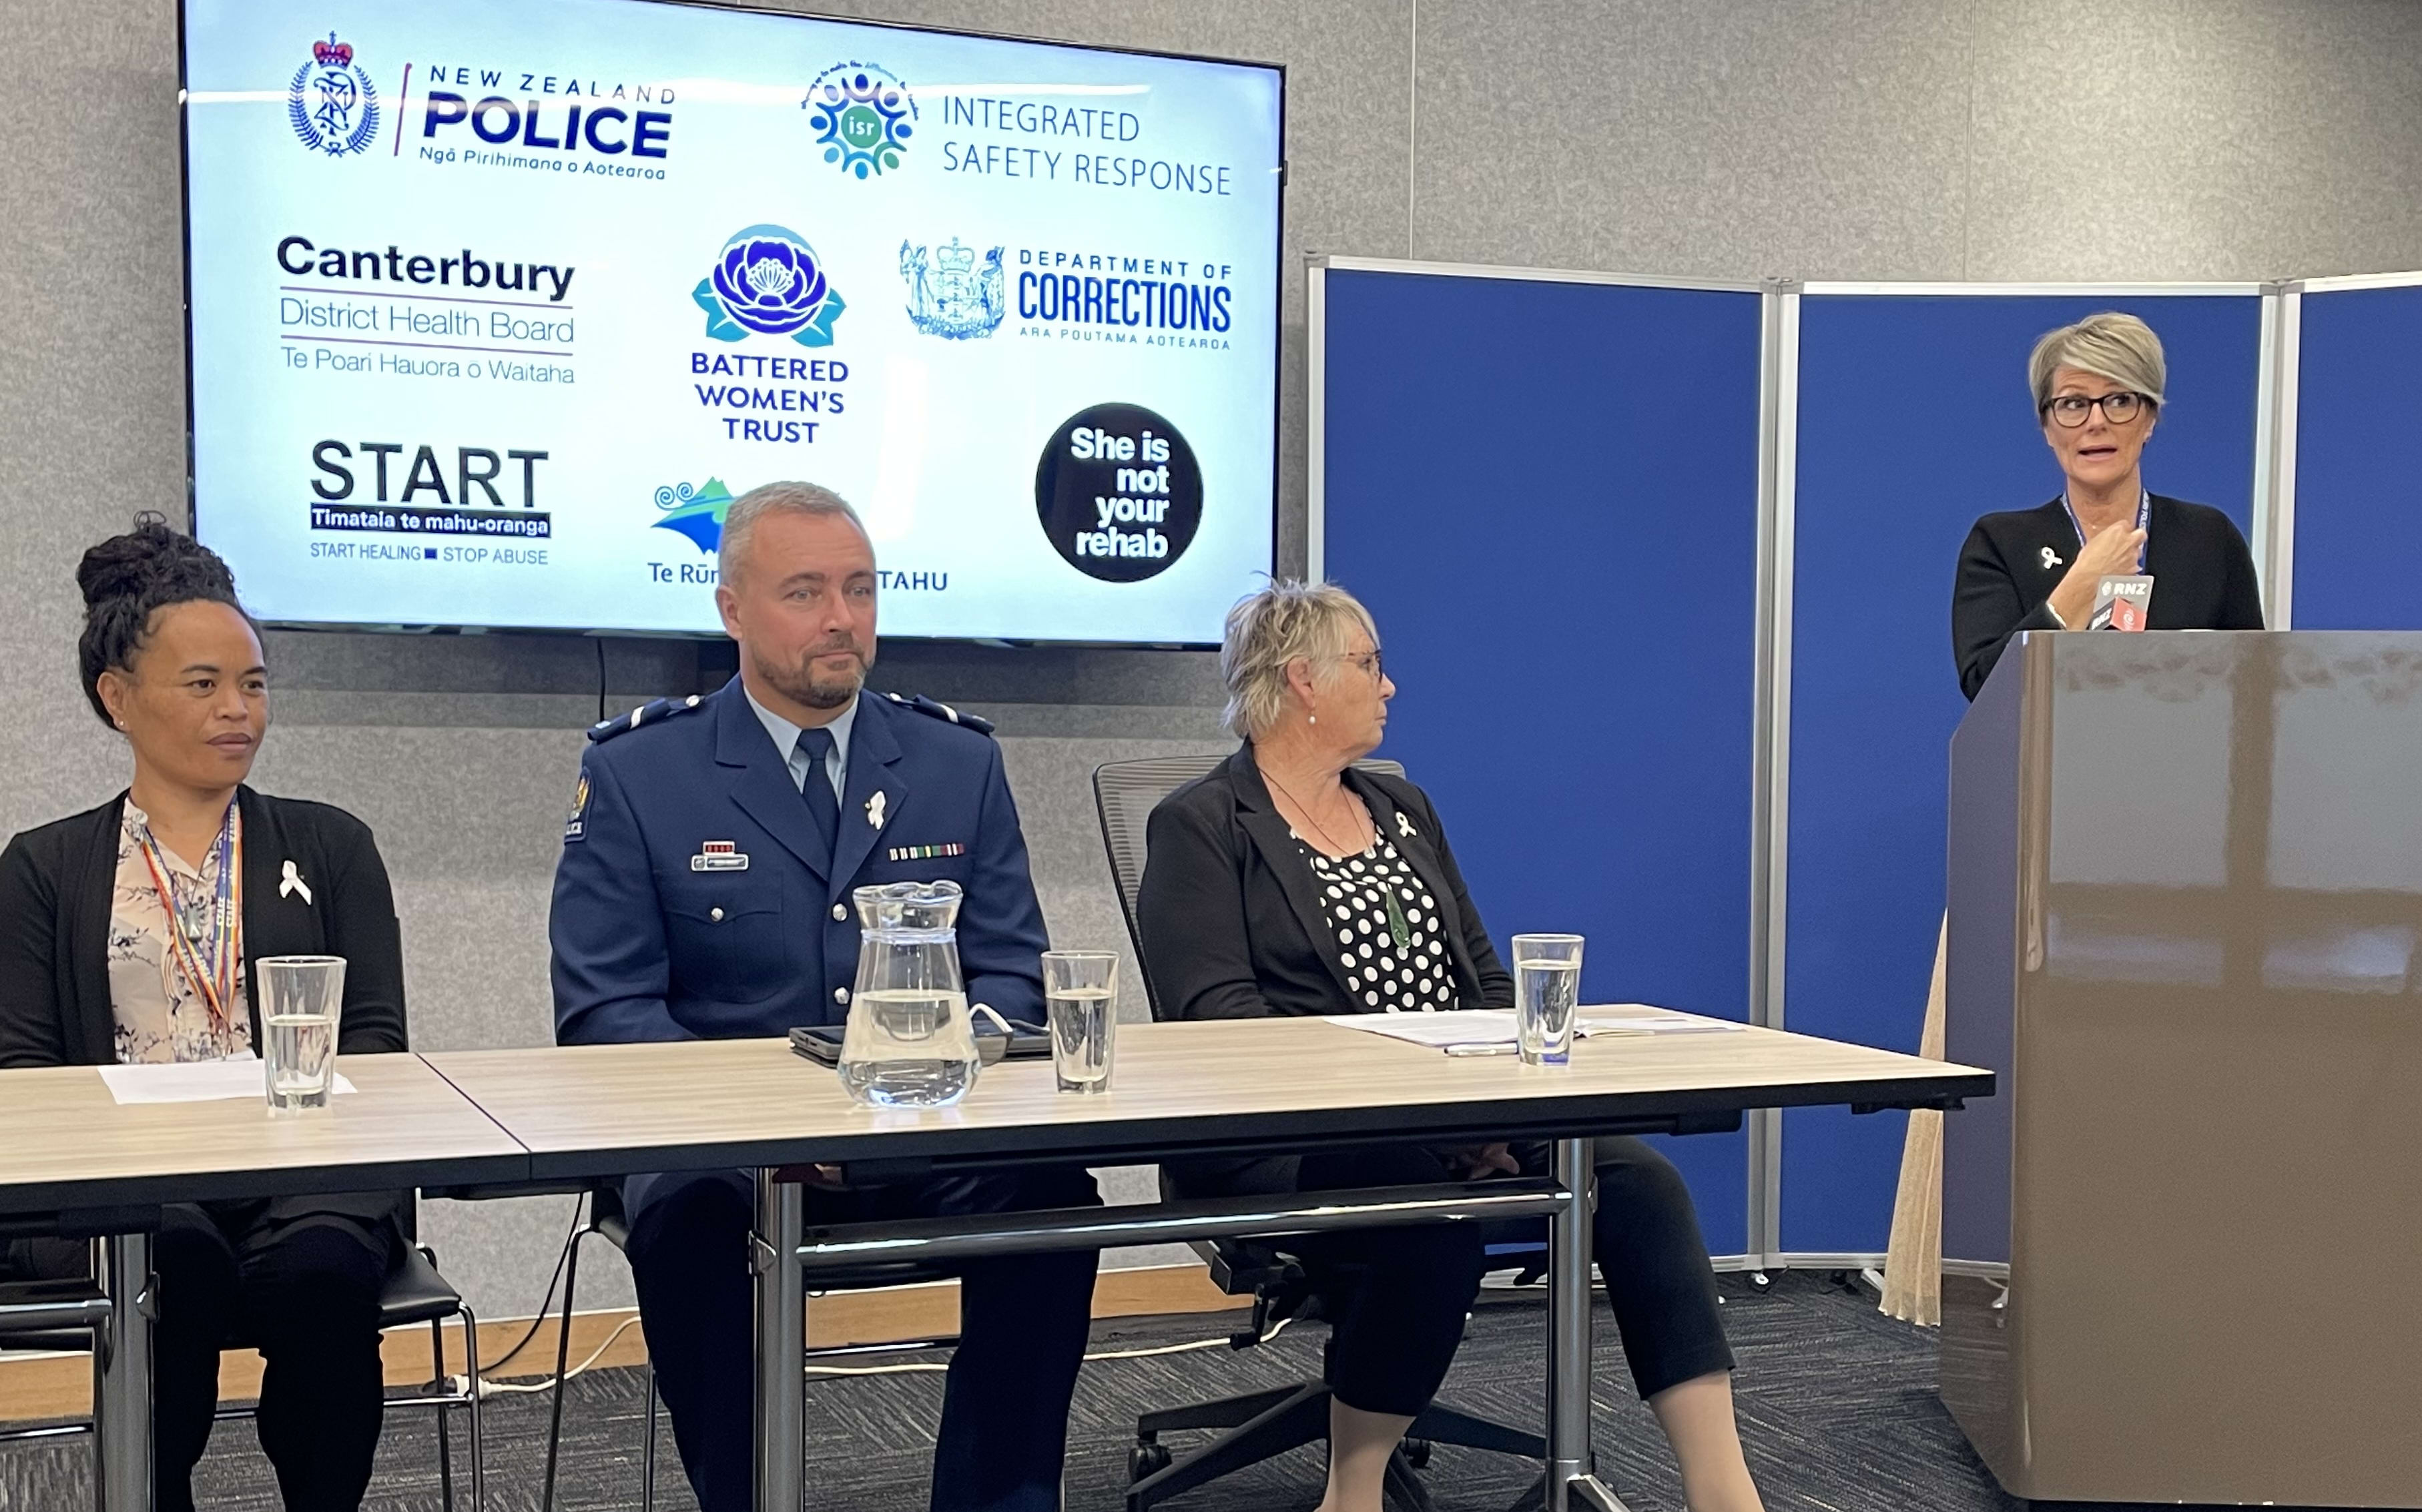 Representatives from agencies working to deal with family harm met in Christchurch today for White Ribbon Day.